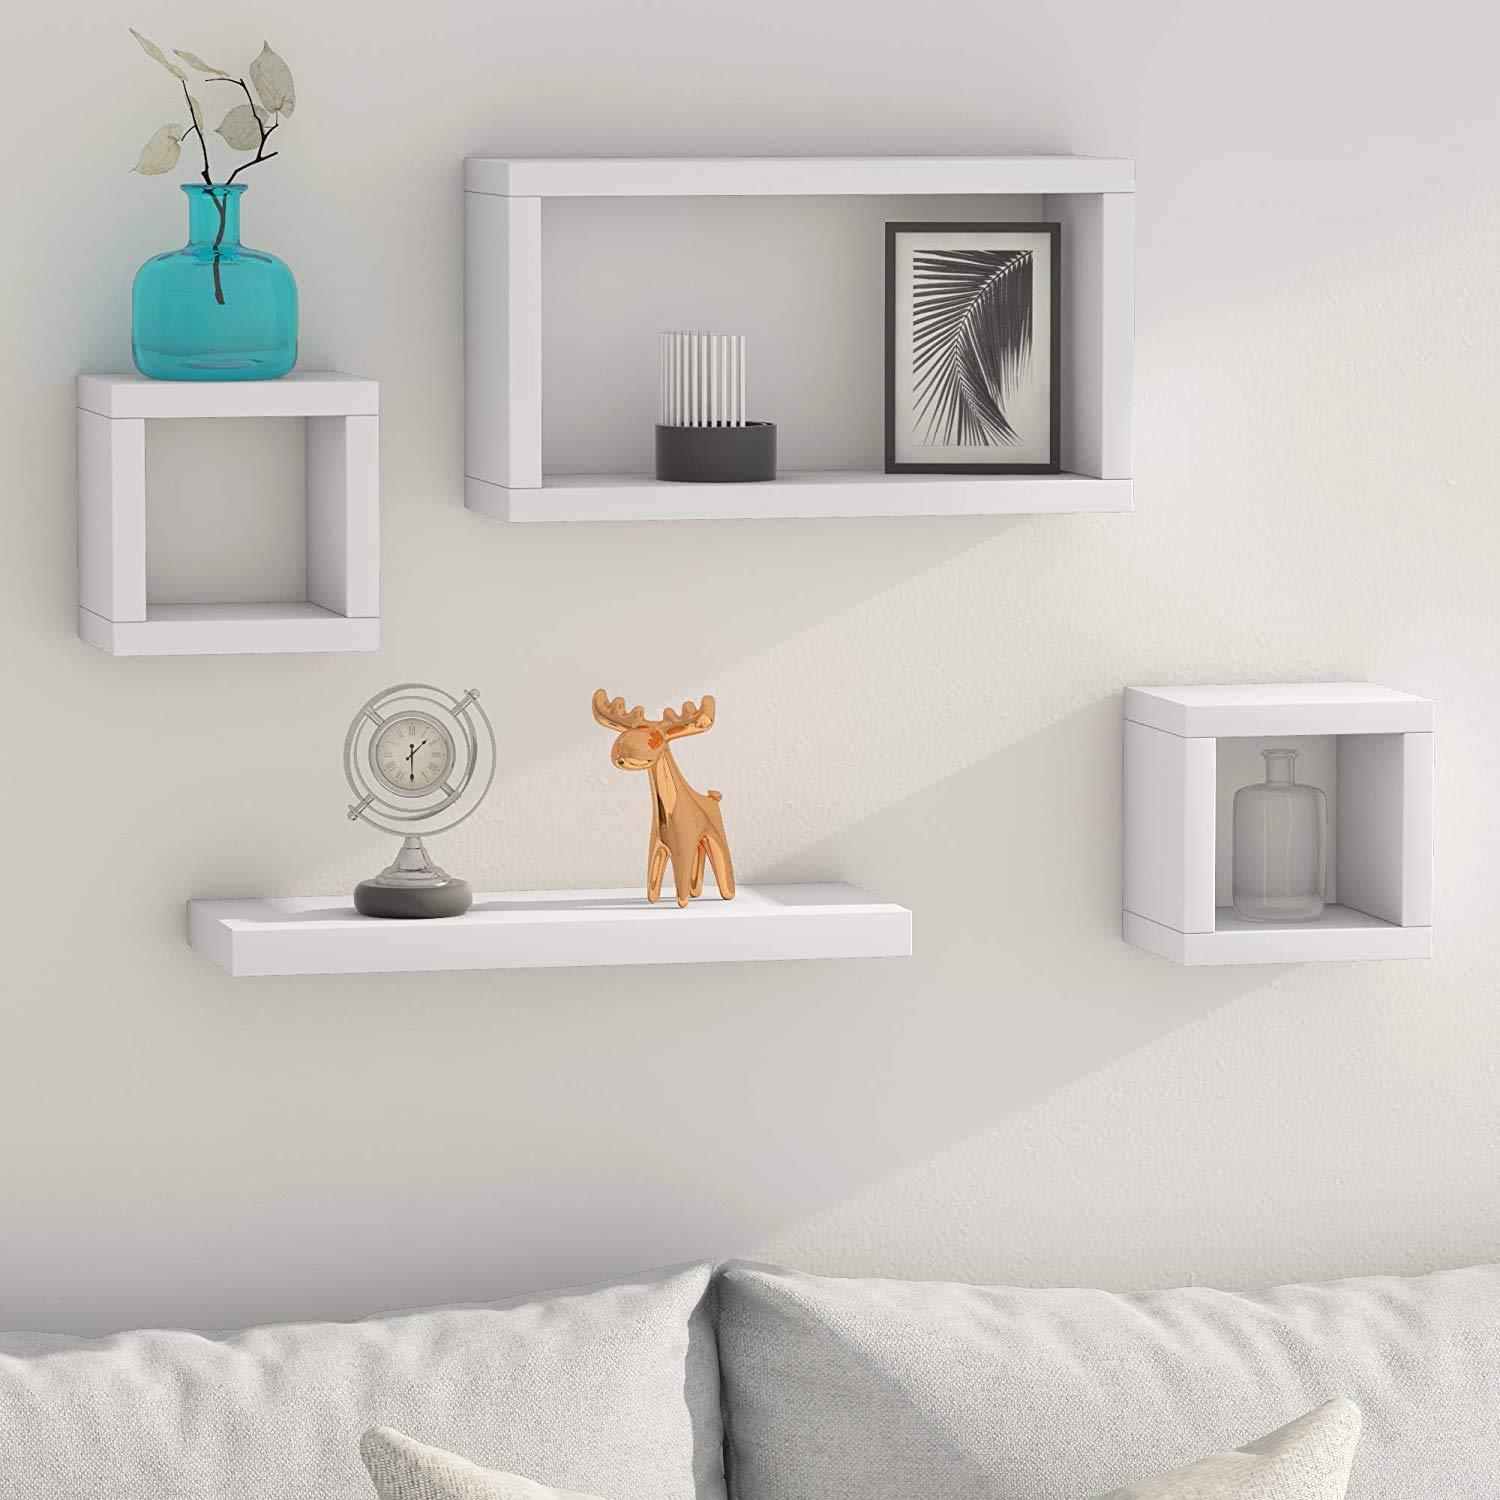 Wooden Wall Shelves - Buy Floating Wall Shelf Wall Mounted Bookcase Online in India